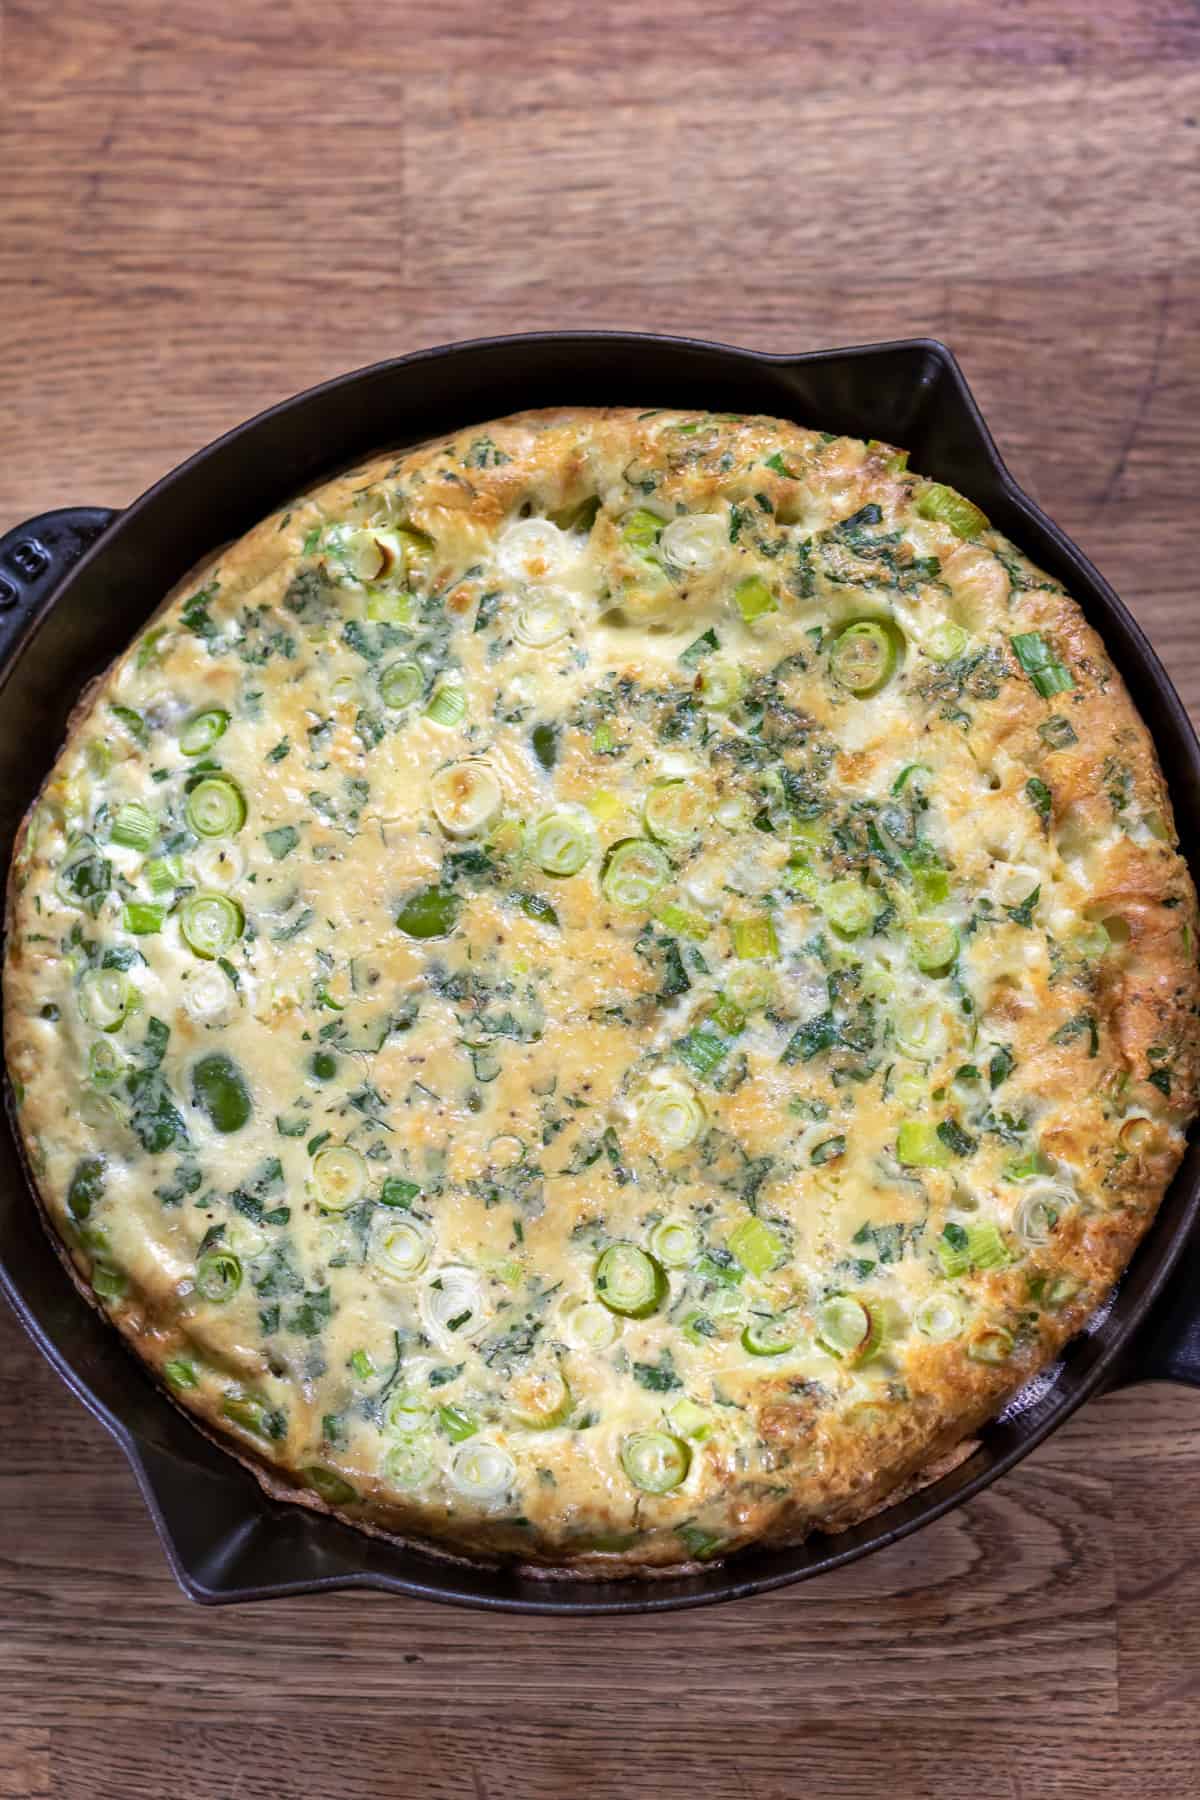 Cooked frittata.